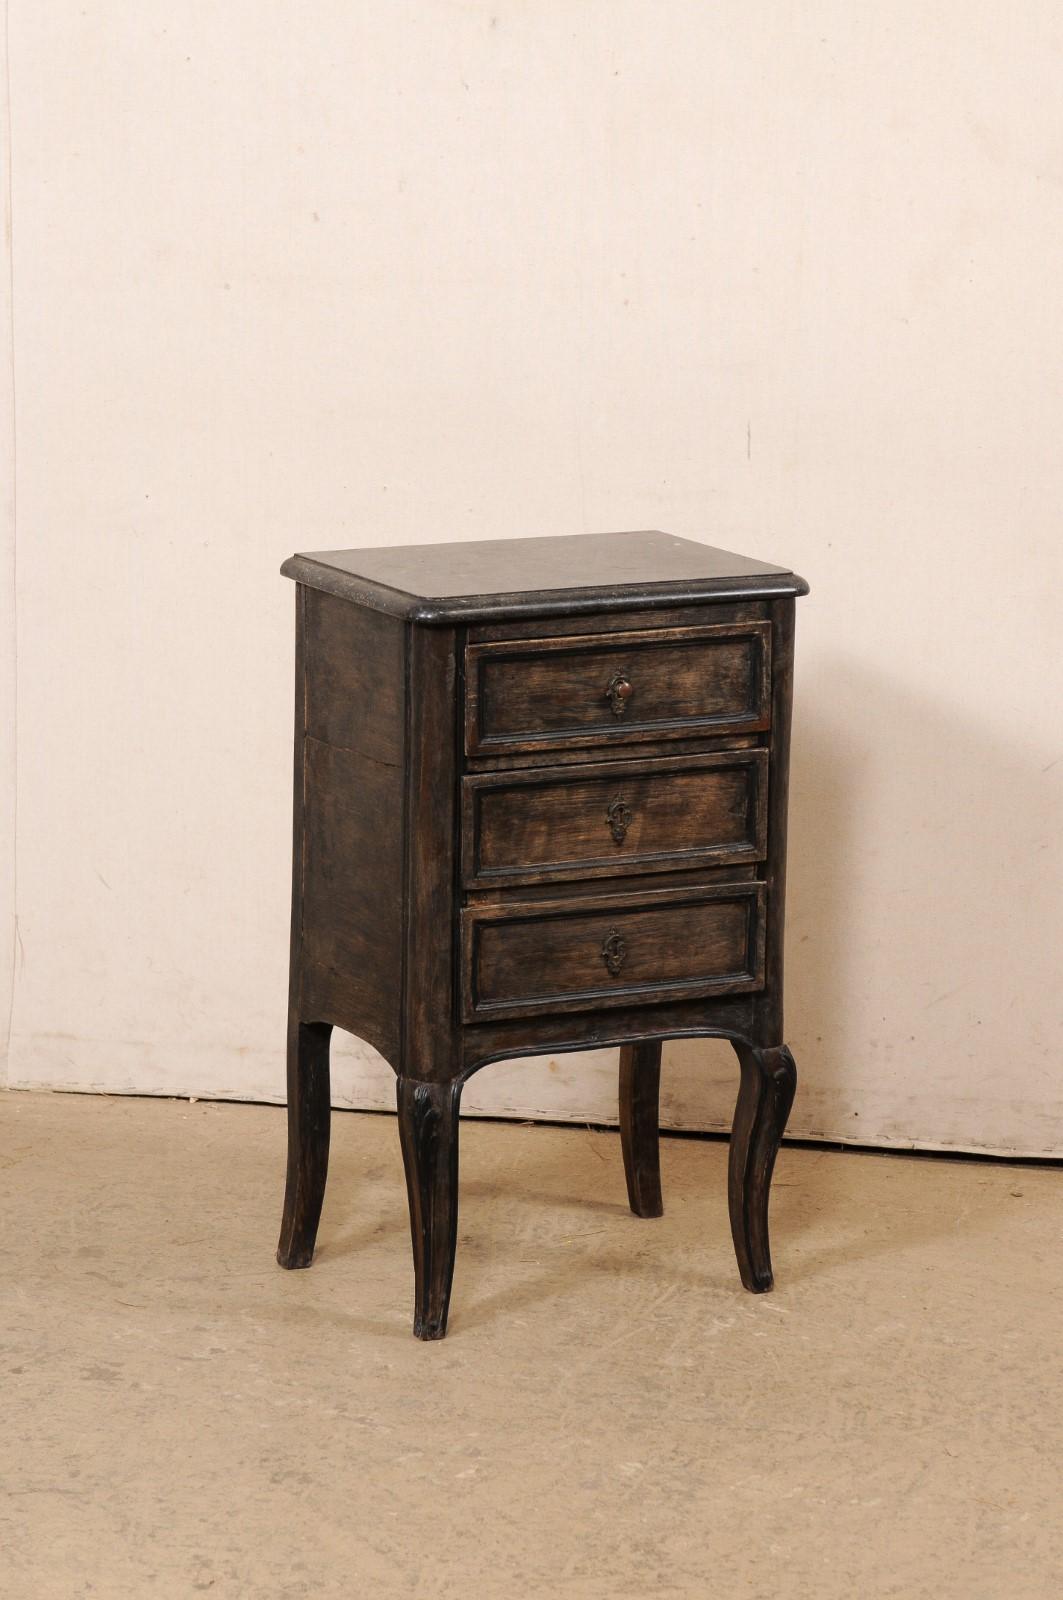 A French painted wood side chest with marble top from the 19th century. This smaller-sized commode from France has a black marble top, with case below which houses a single recessed-panel drawer above a pair of 